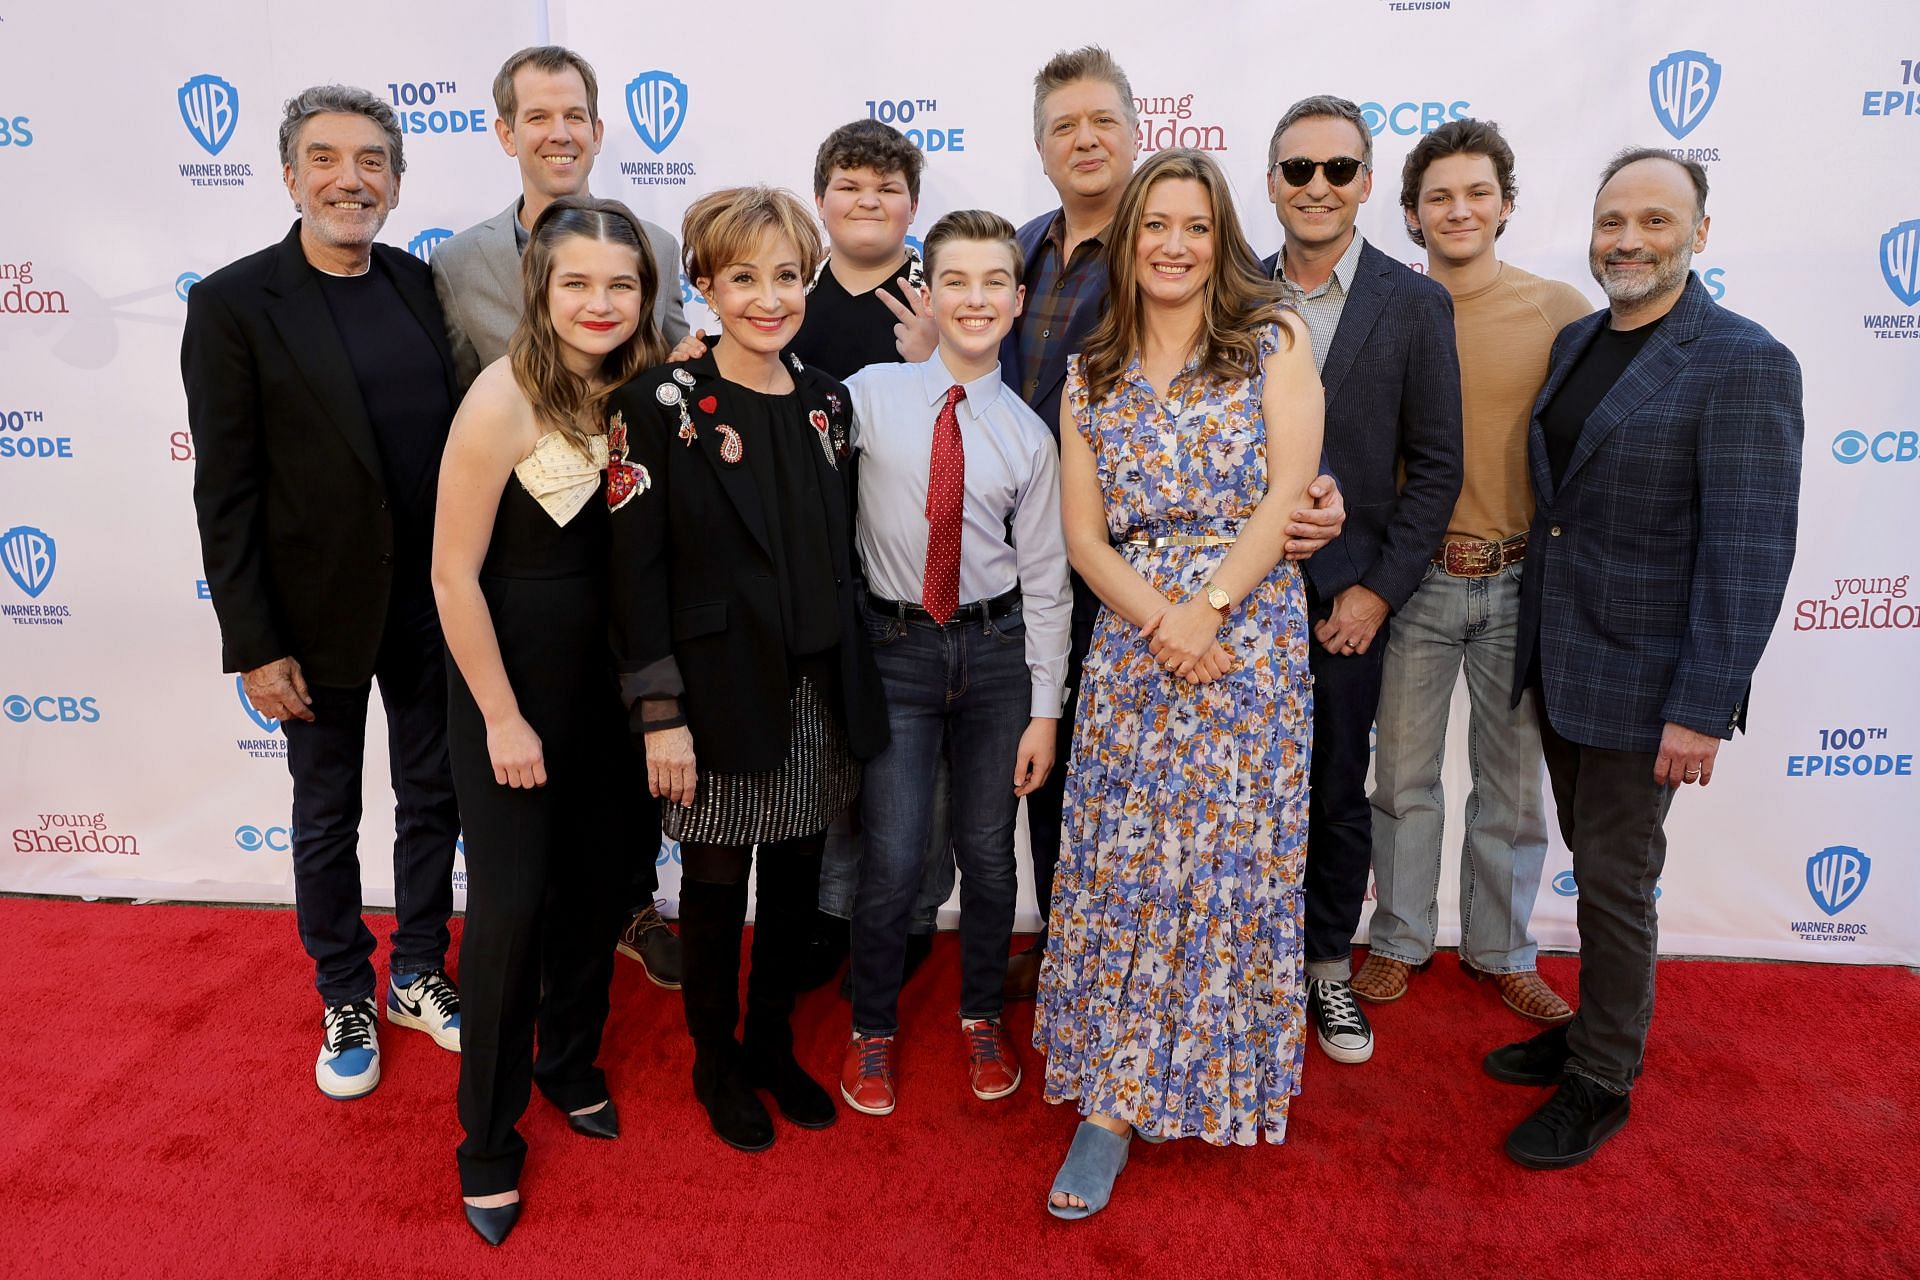 Cast of Young Sheldon (Image via Getty)